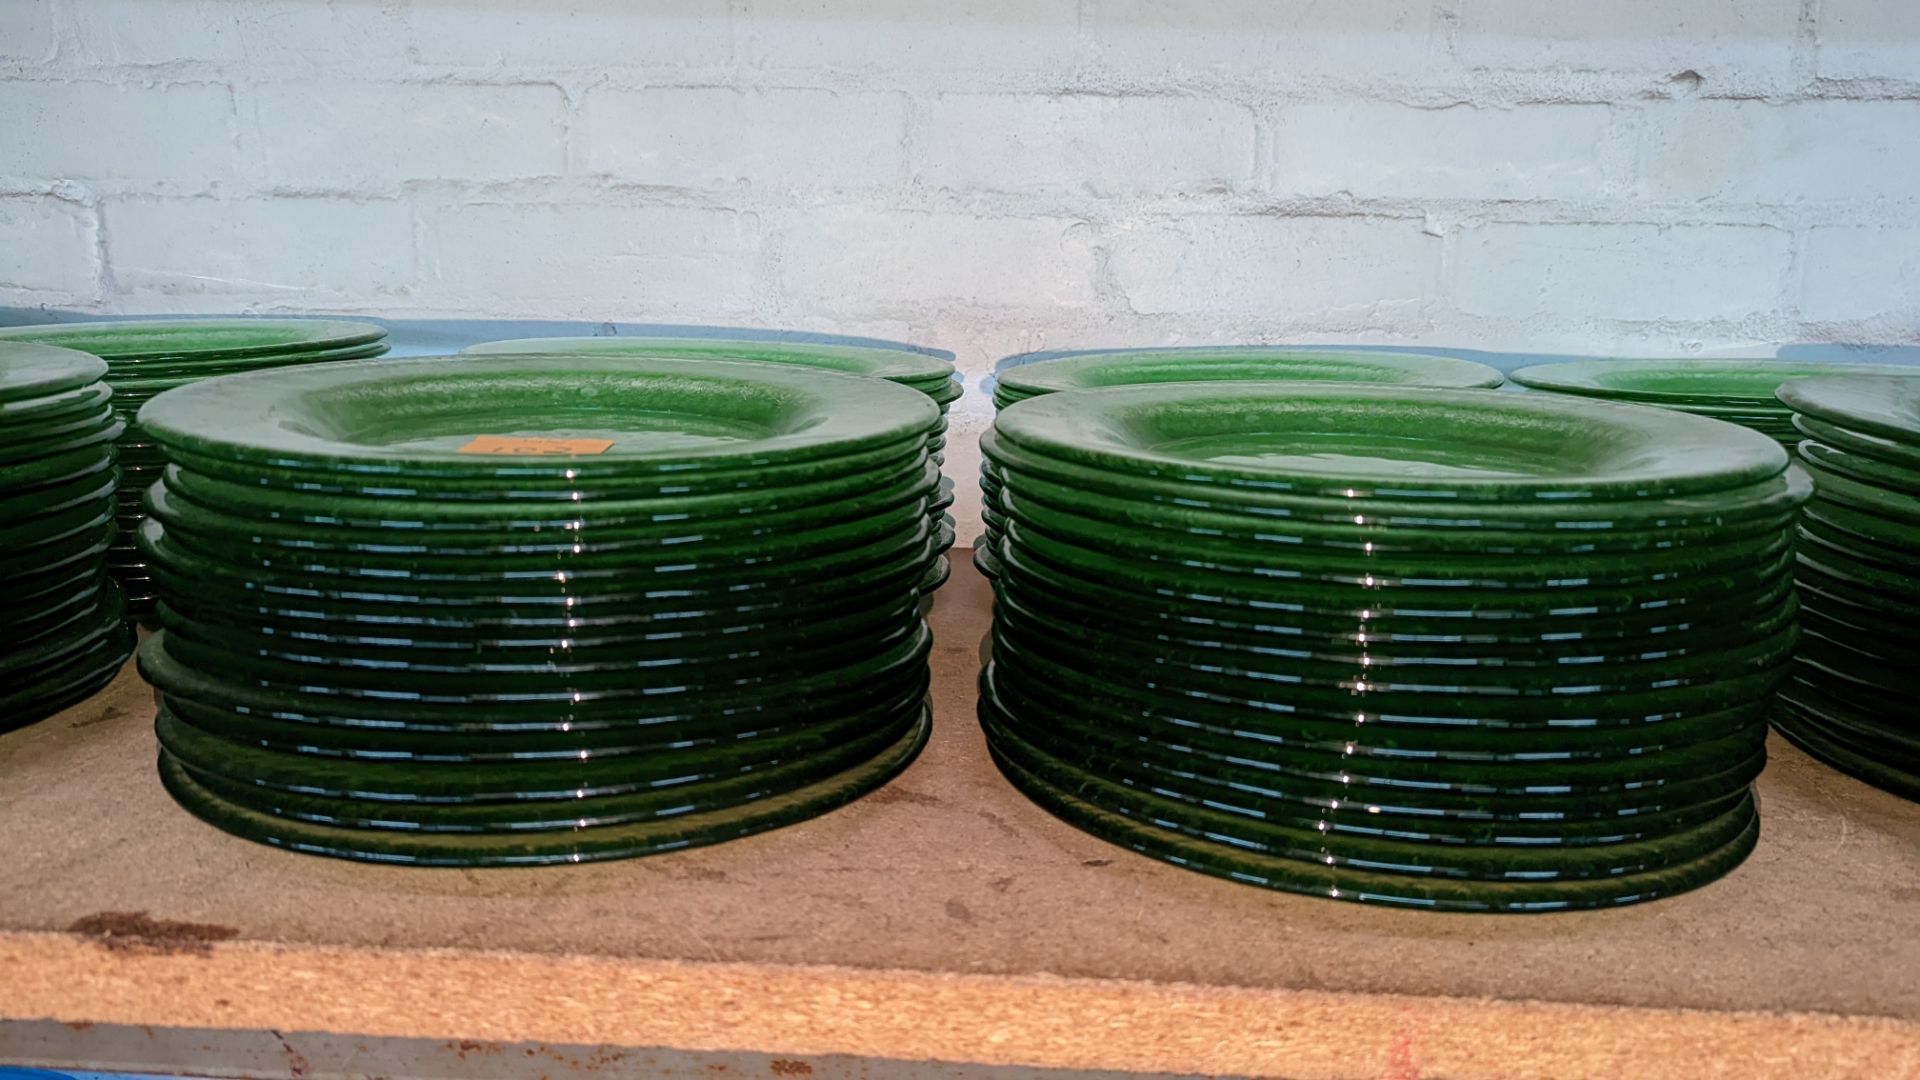 60 off green glass plates each measuring approximately 27cm diameter - Image 2 of 3